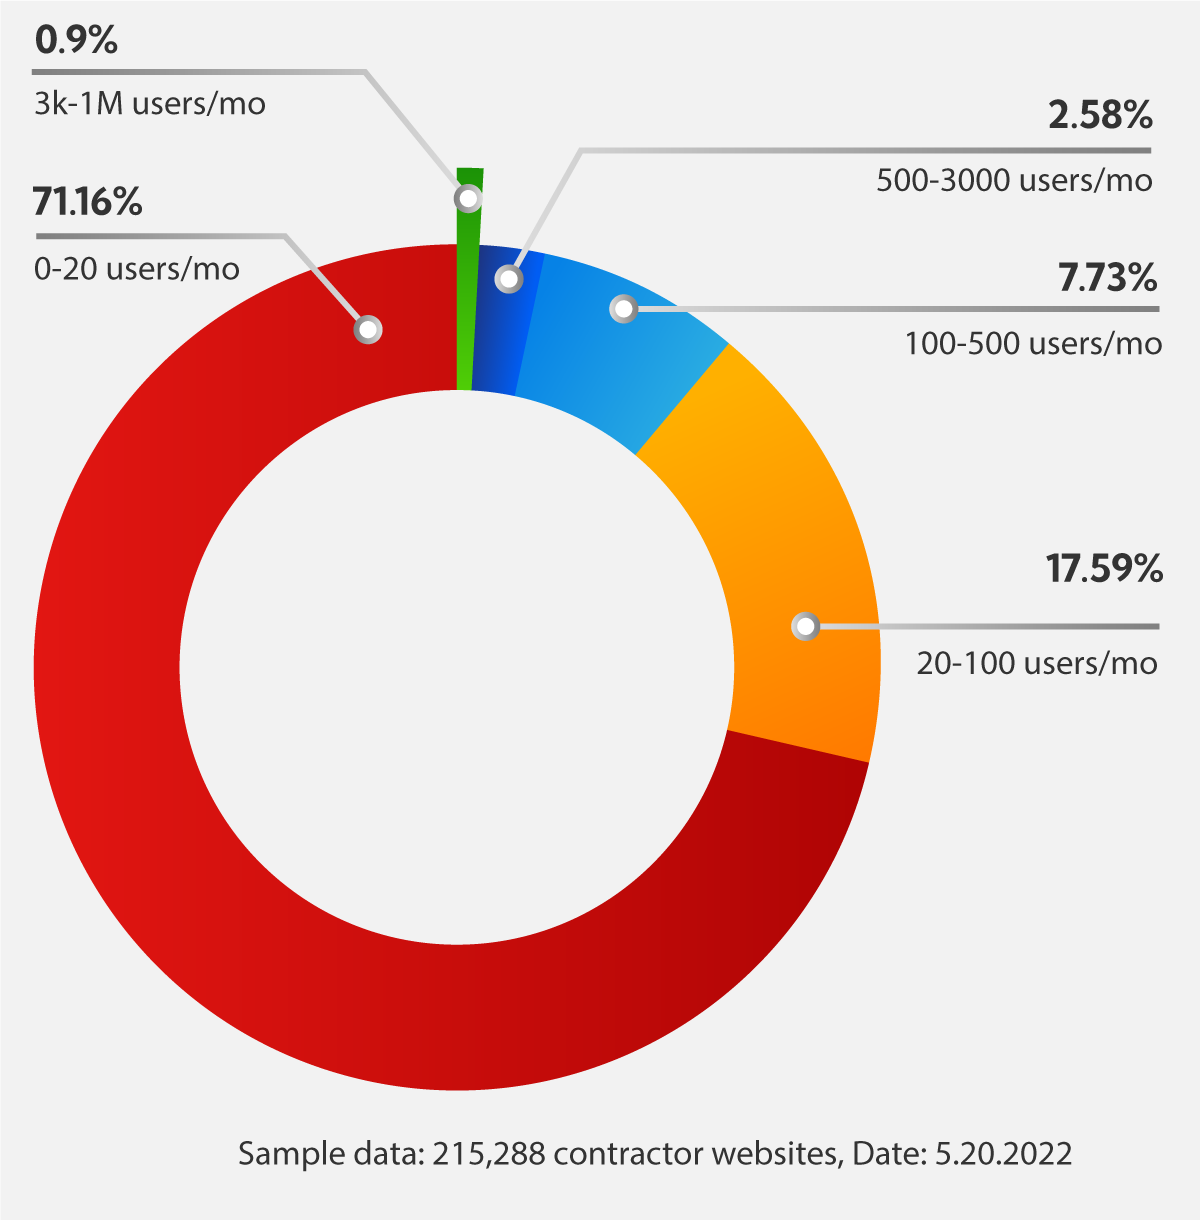 Study on contractor websites shows 71,16% of websites have less than 20 visitors per month